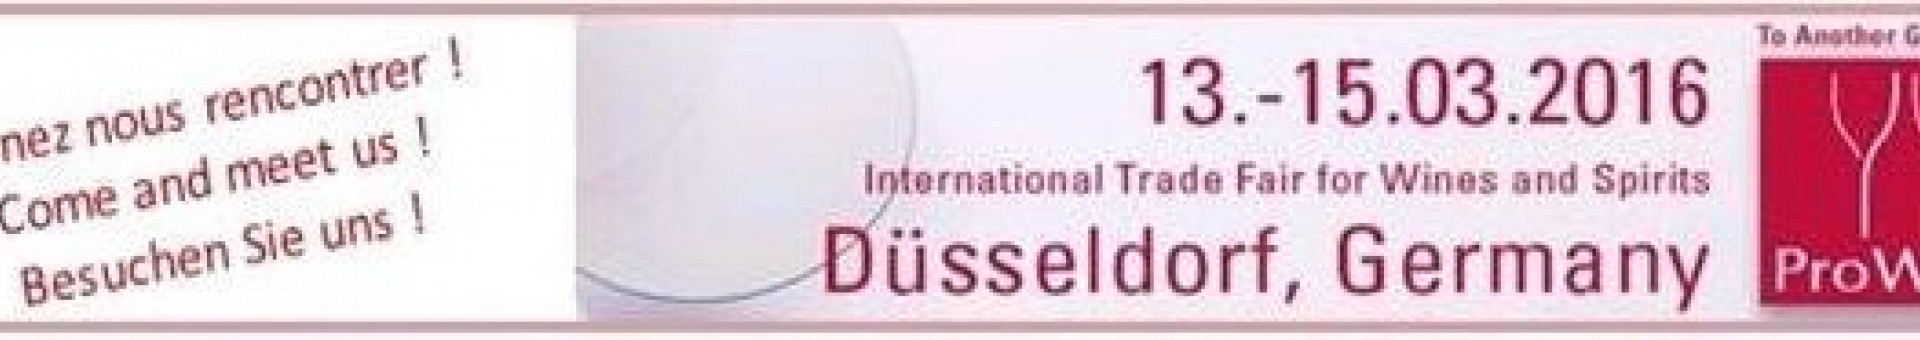 PROWEIN 2016 - HALL 11 / ALLEE D / STAND 110